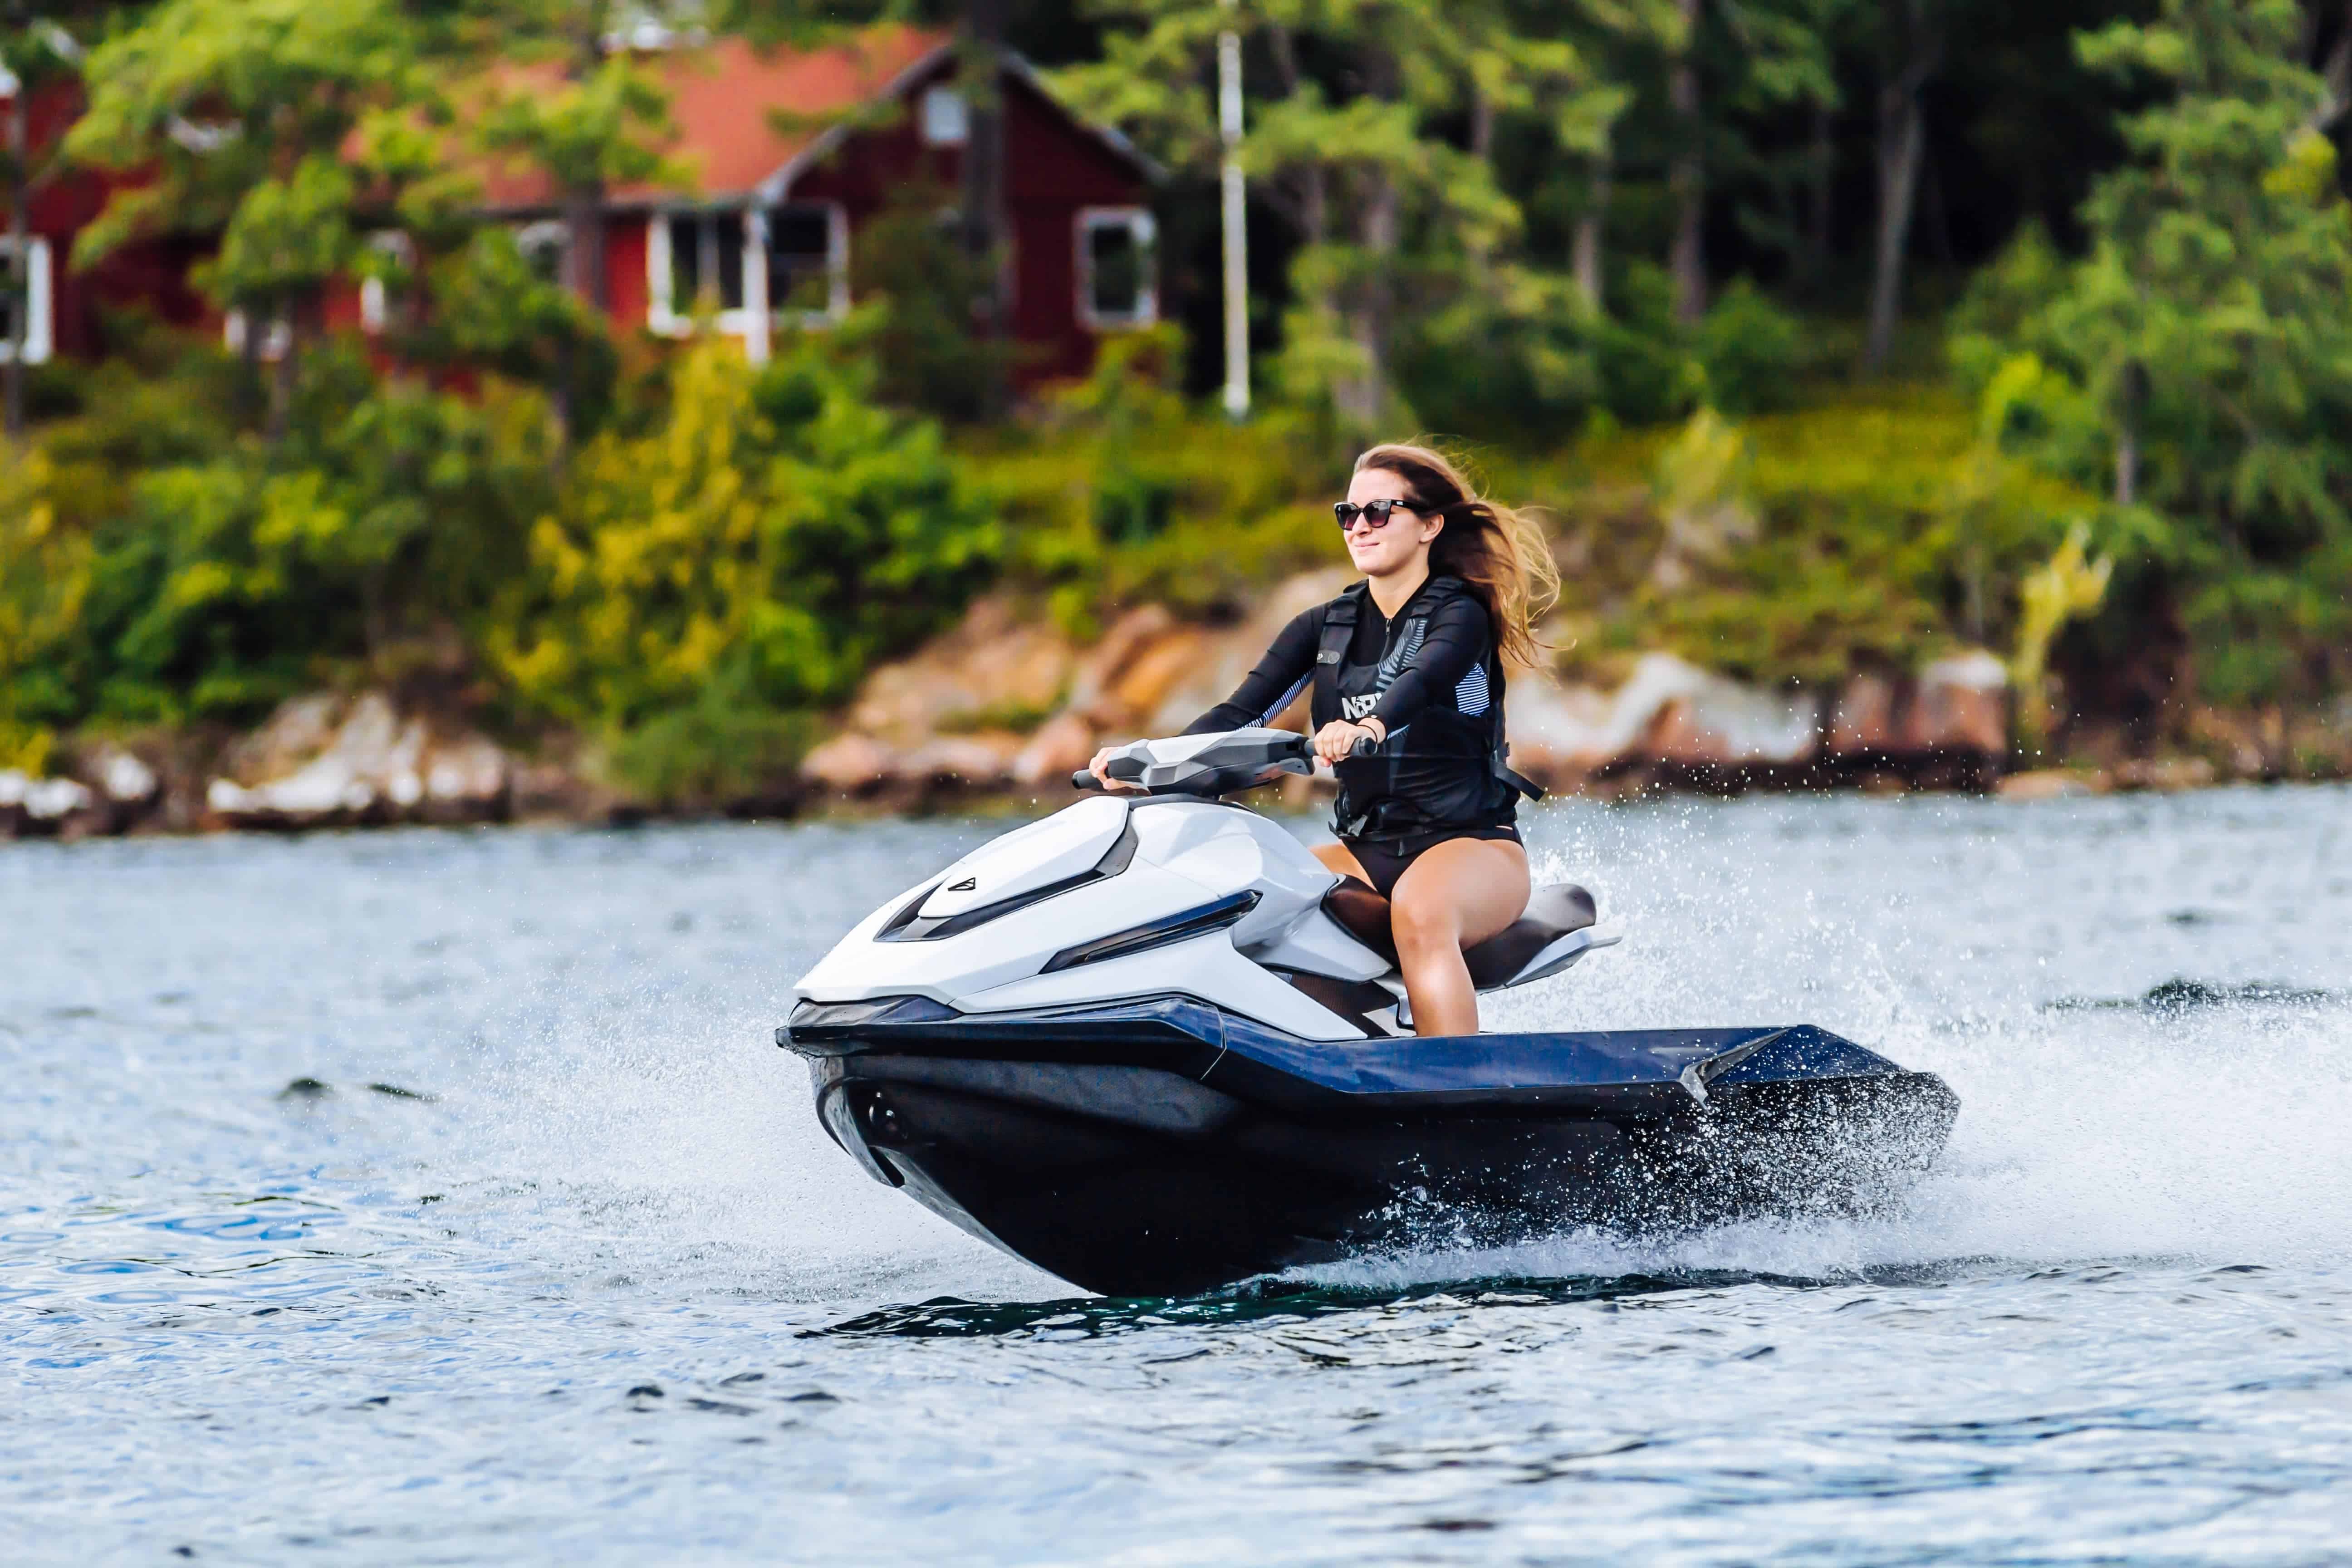 How Much Does a Jet Ski Weigh?